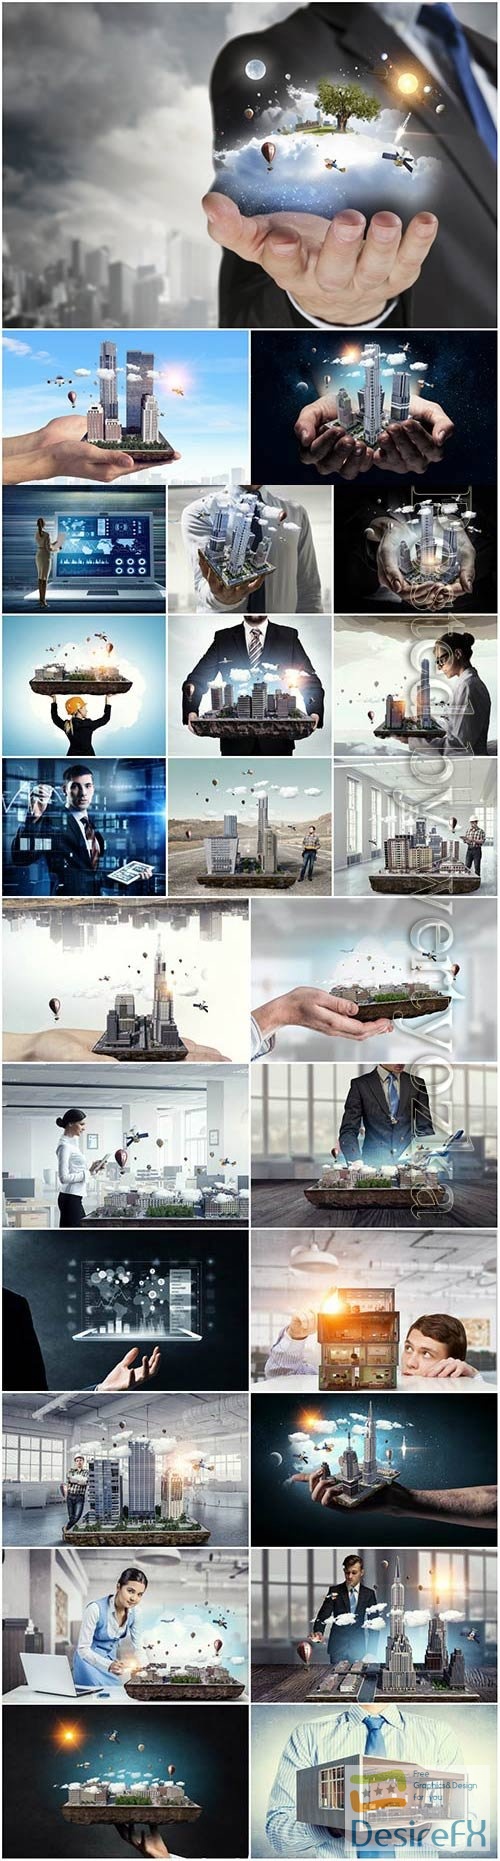 Business concept stock photo